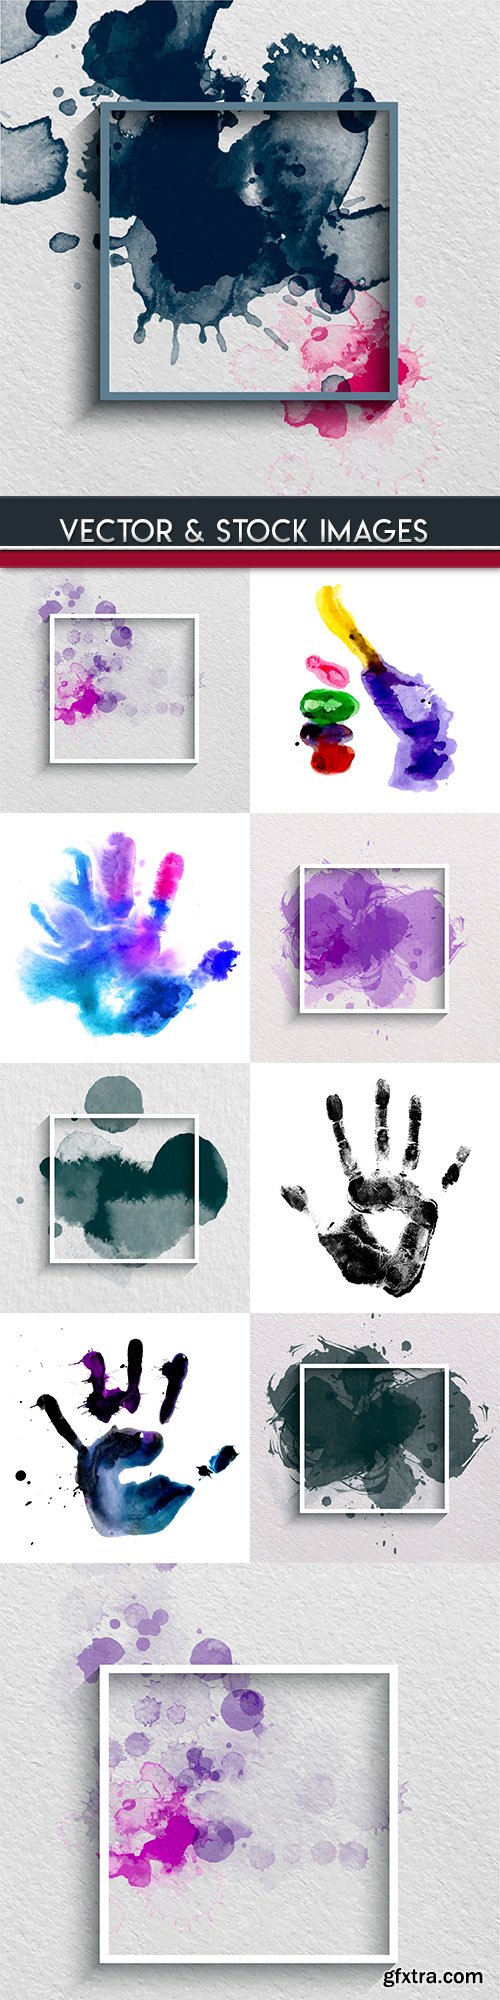 Watercolor splashes and prints hands banner design